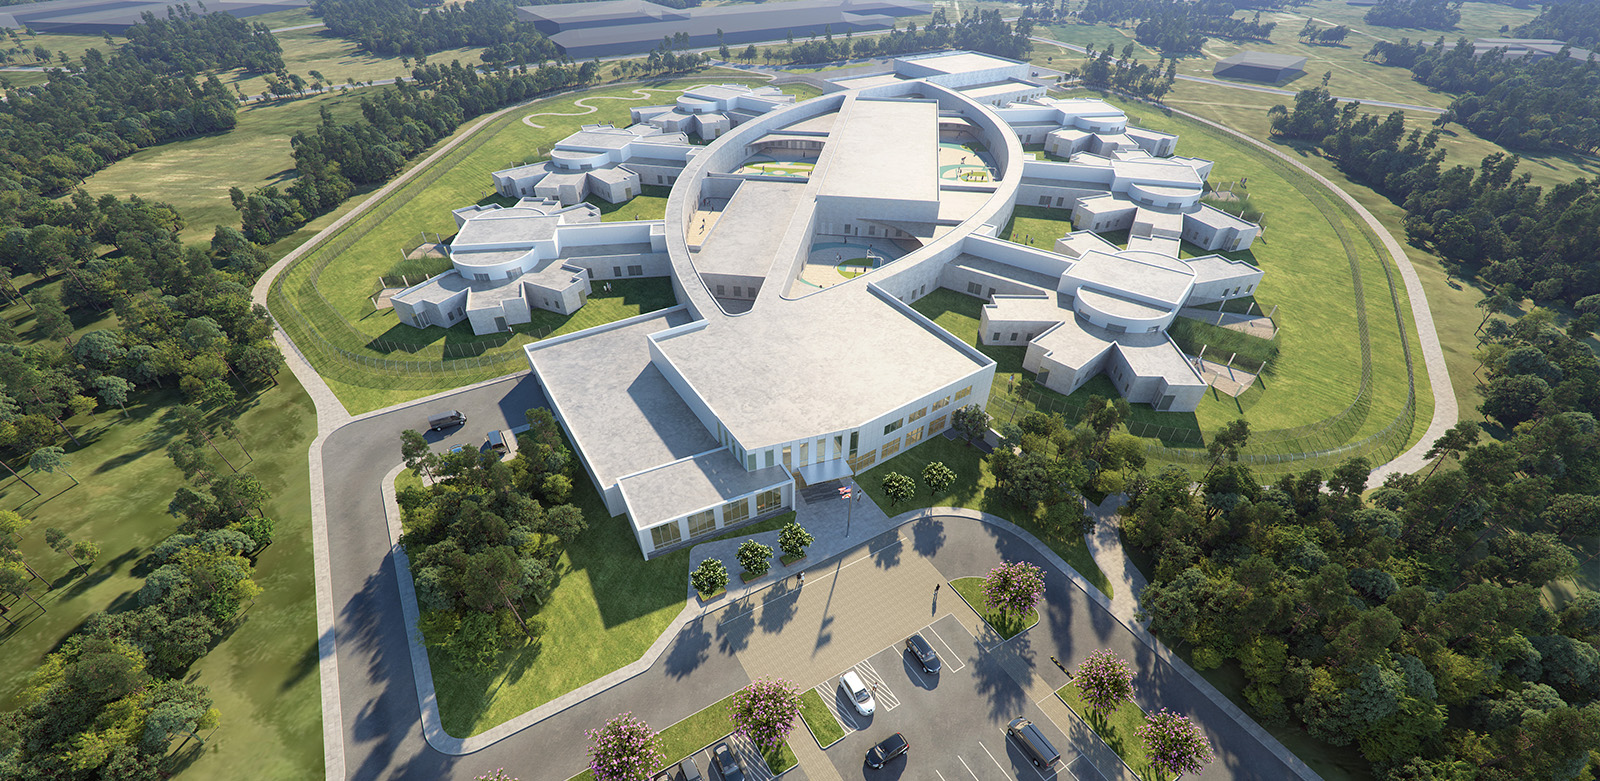 Florida State Hospital APD Forensic Facility – Master Plan and Implementation